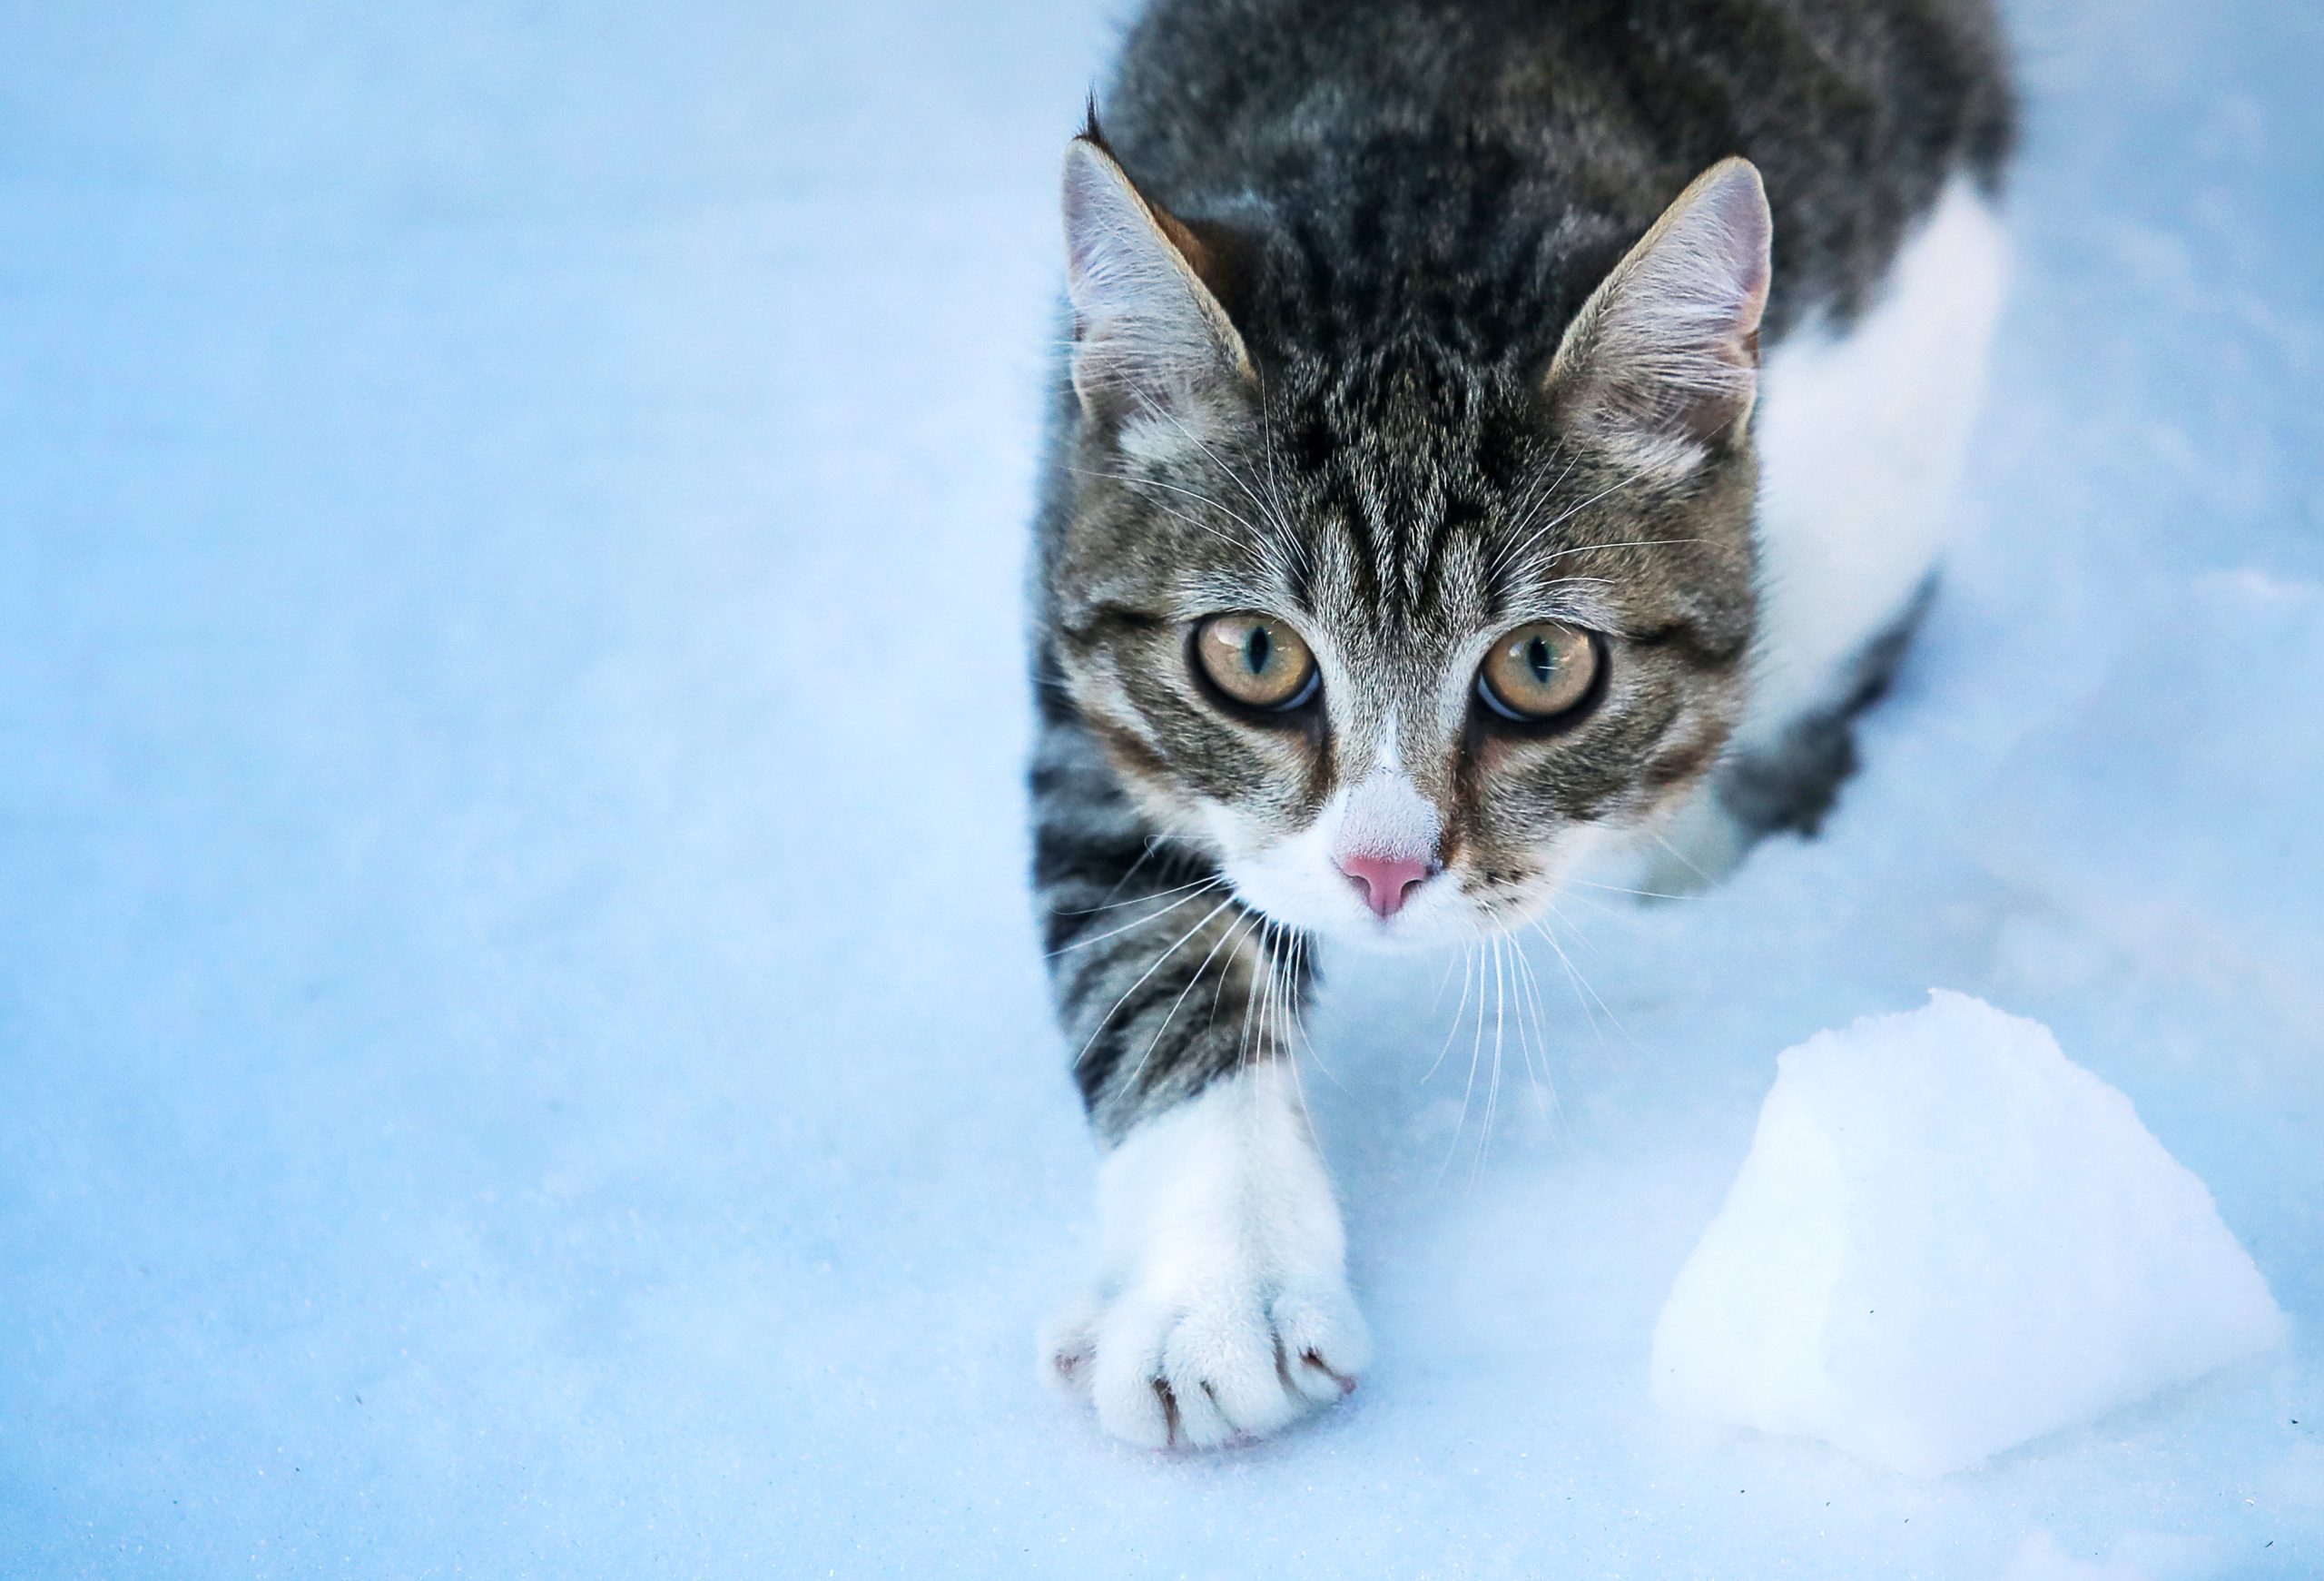 A tabby cat with white paws stalks on snowy ground.